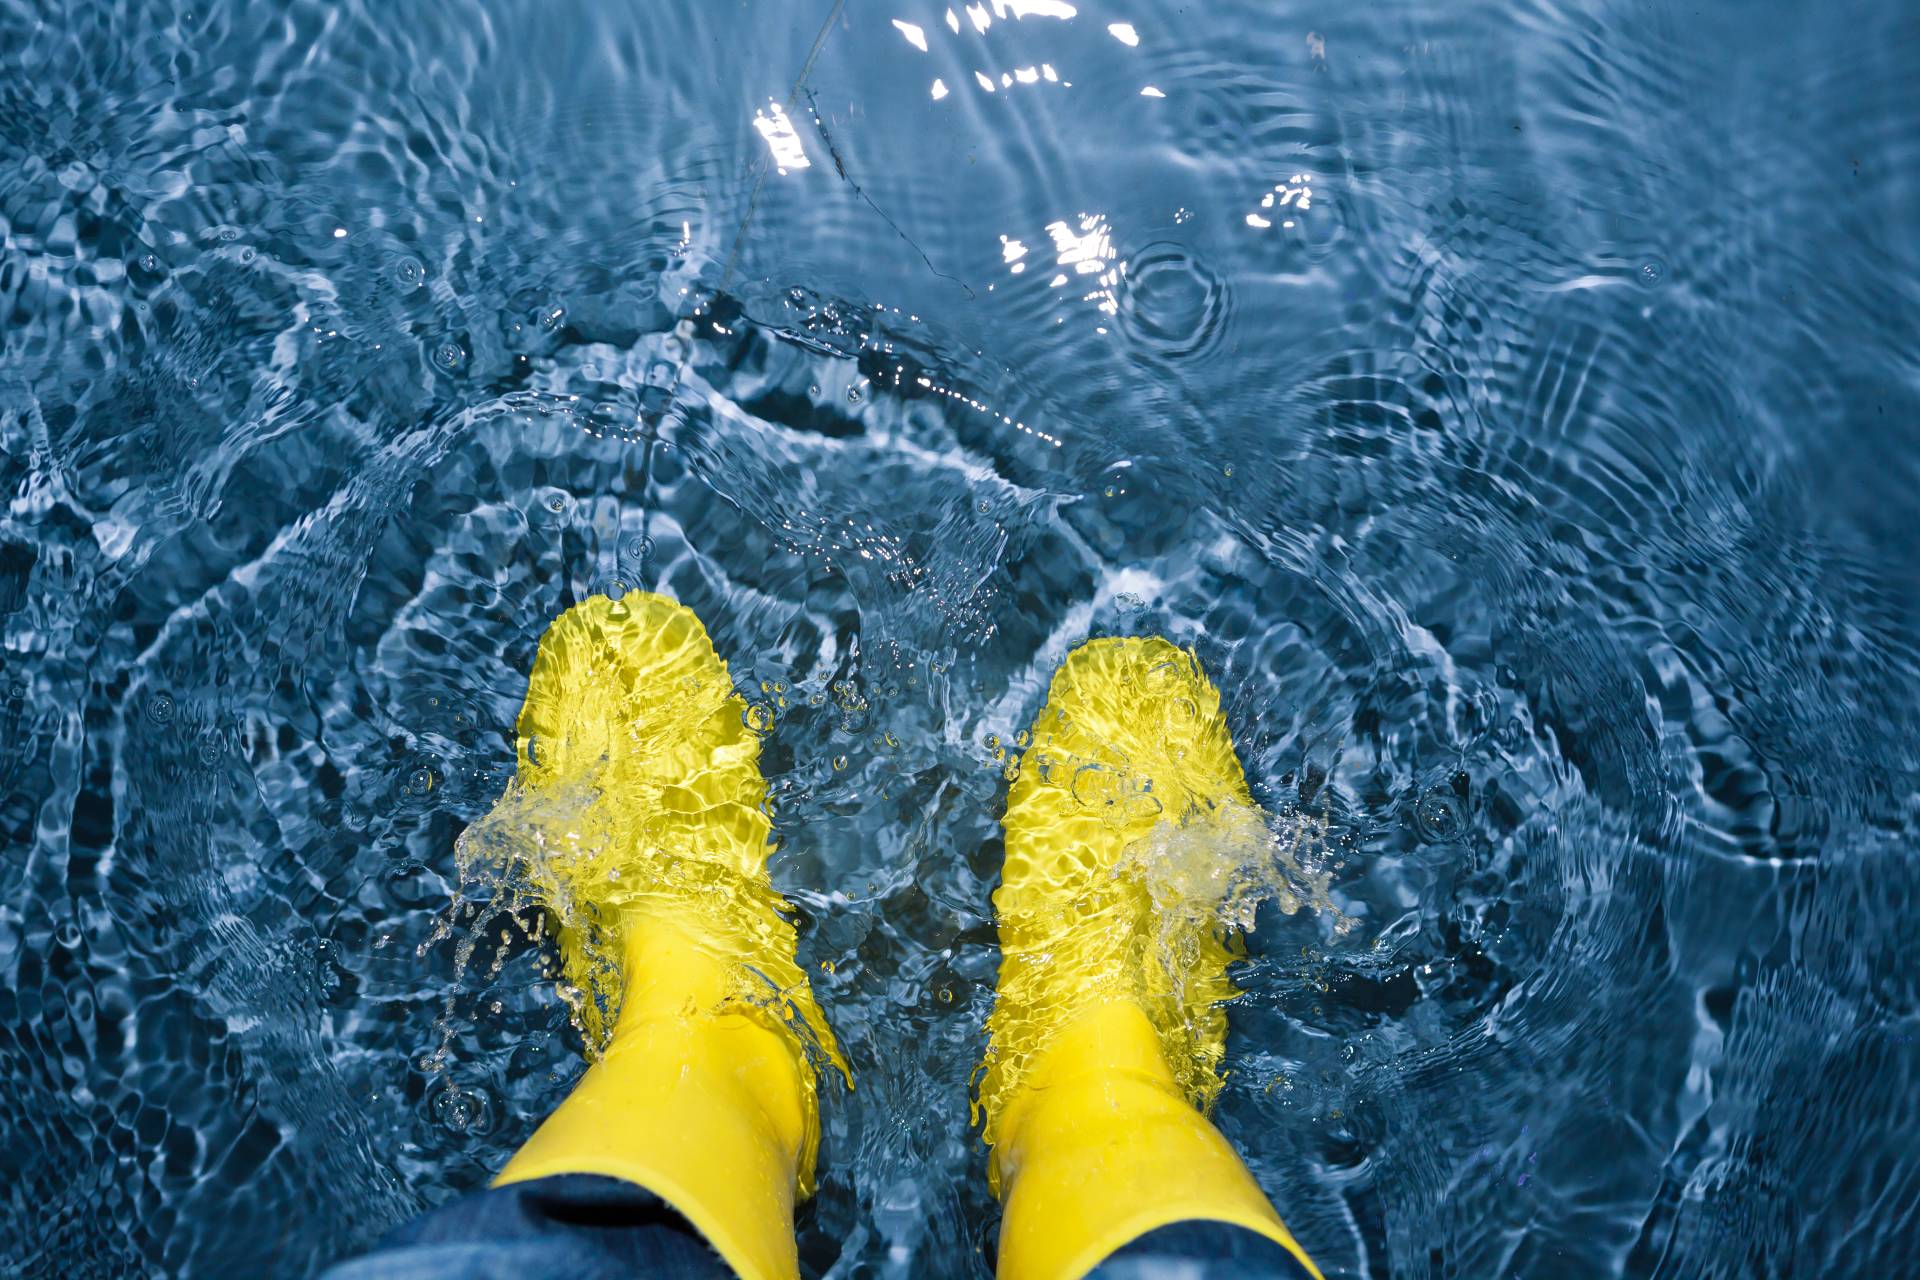 Rubber boots in water